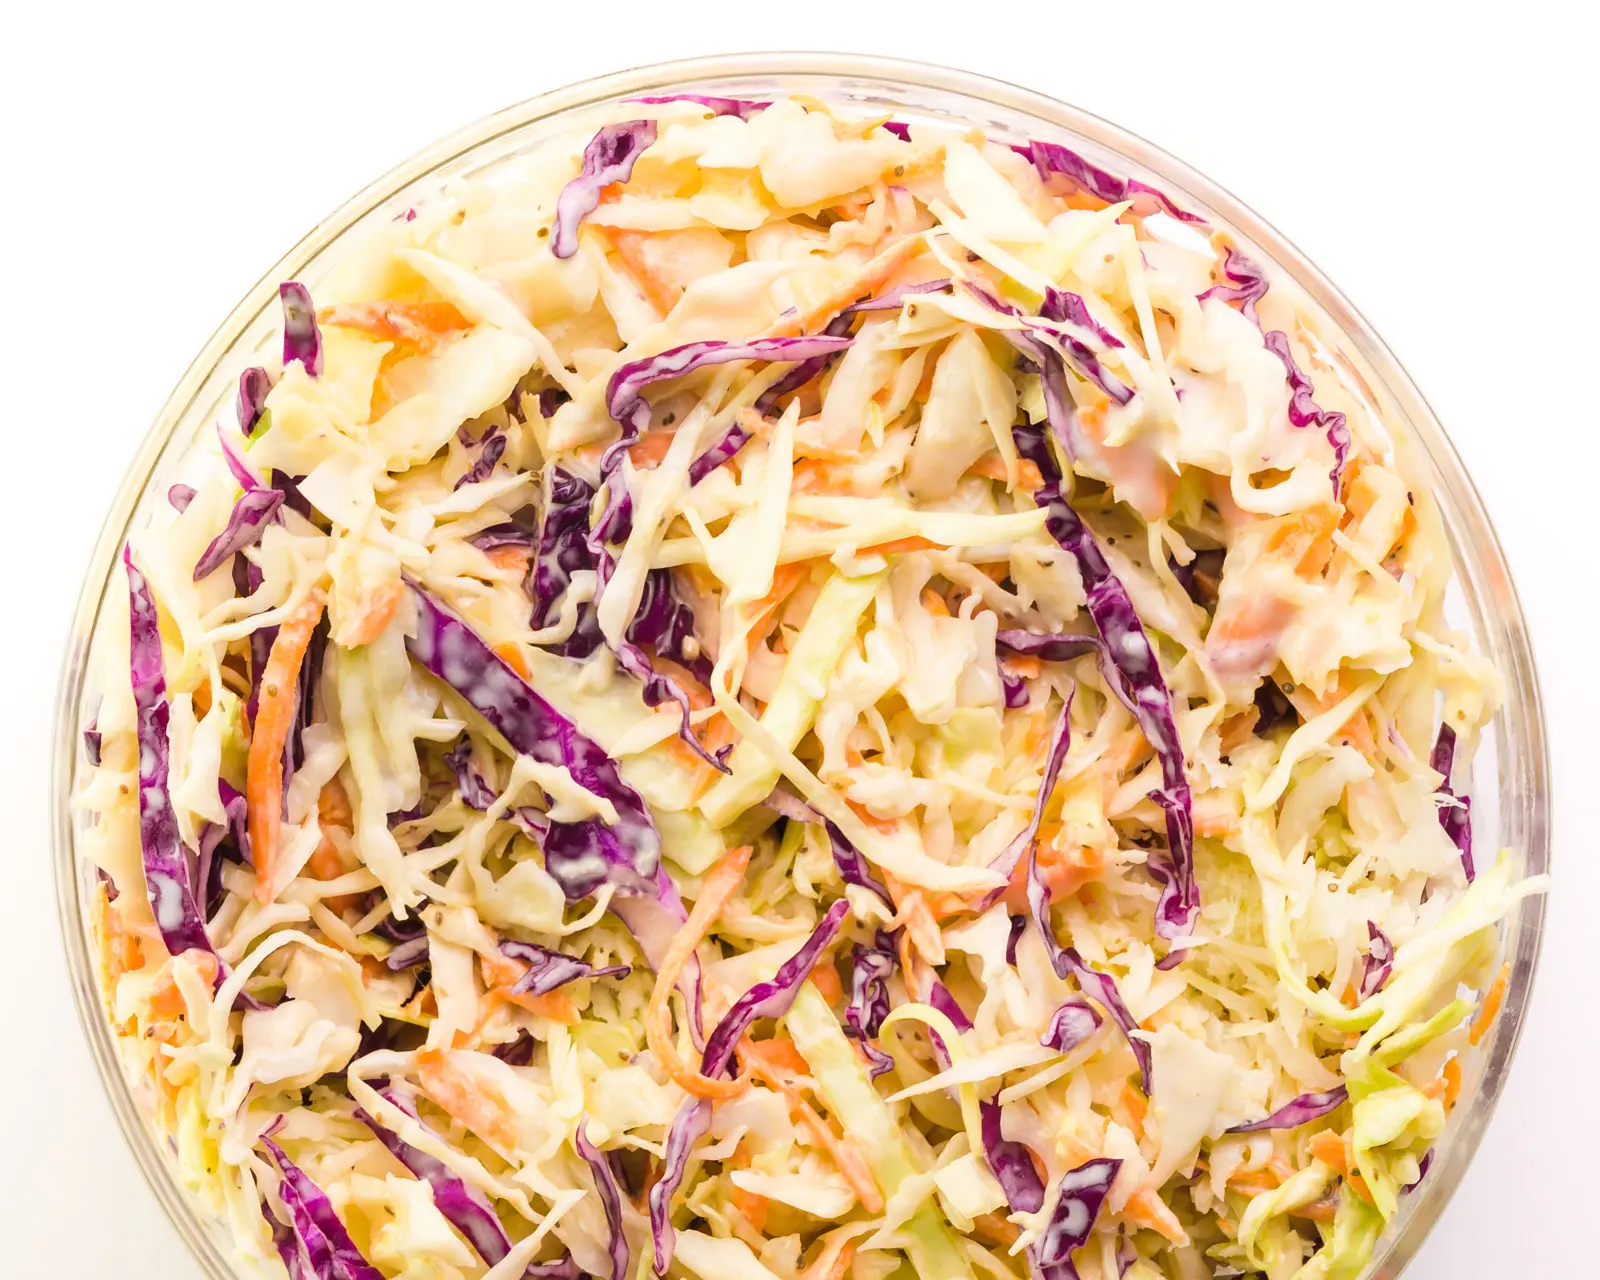 Looking down on a bowl of vegan coleslaw, showing shredded red and green cabbage.